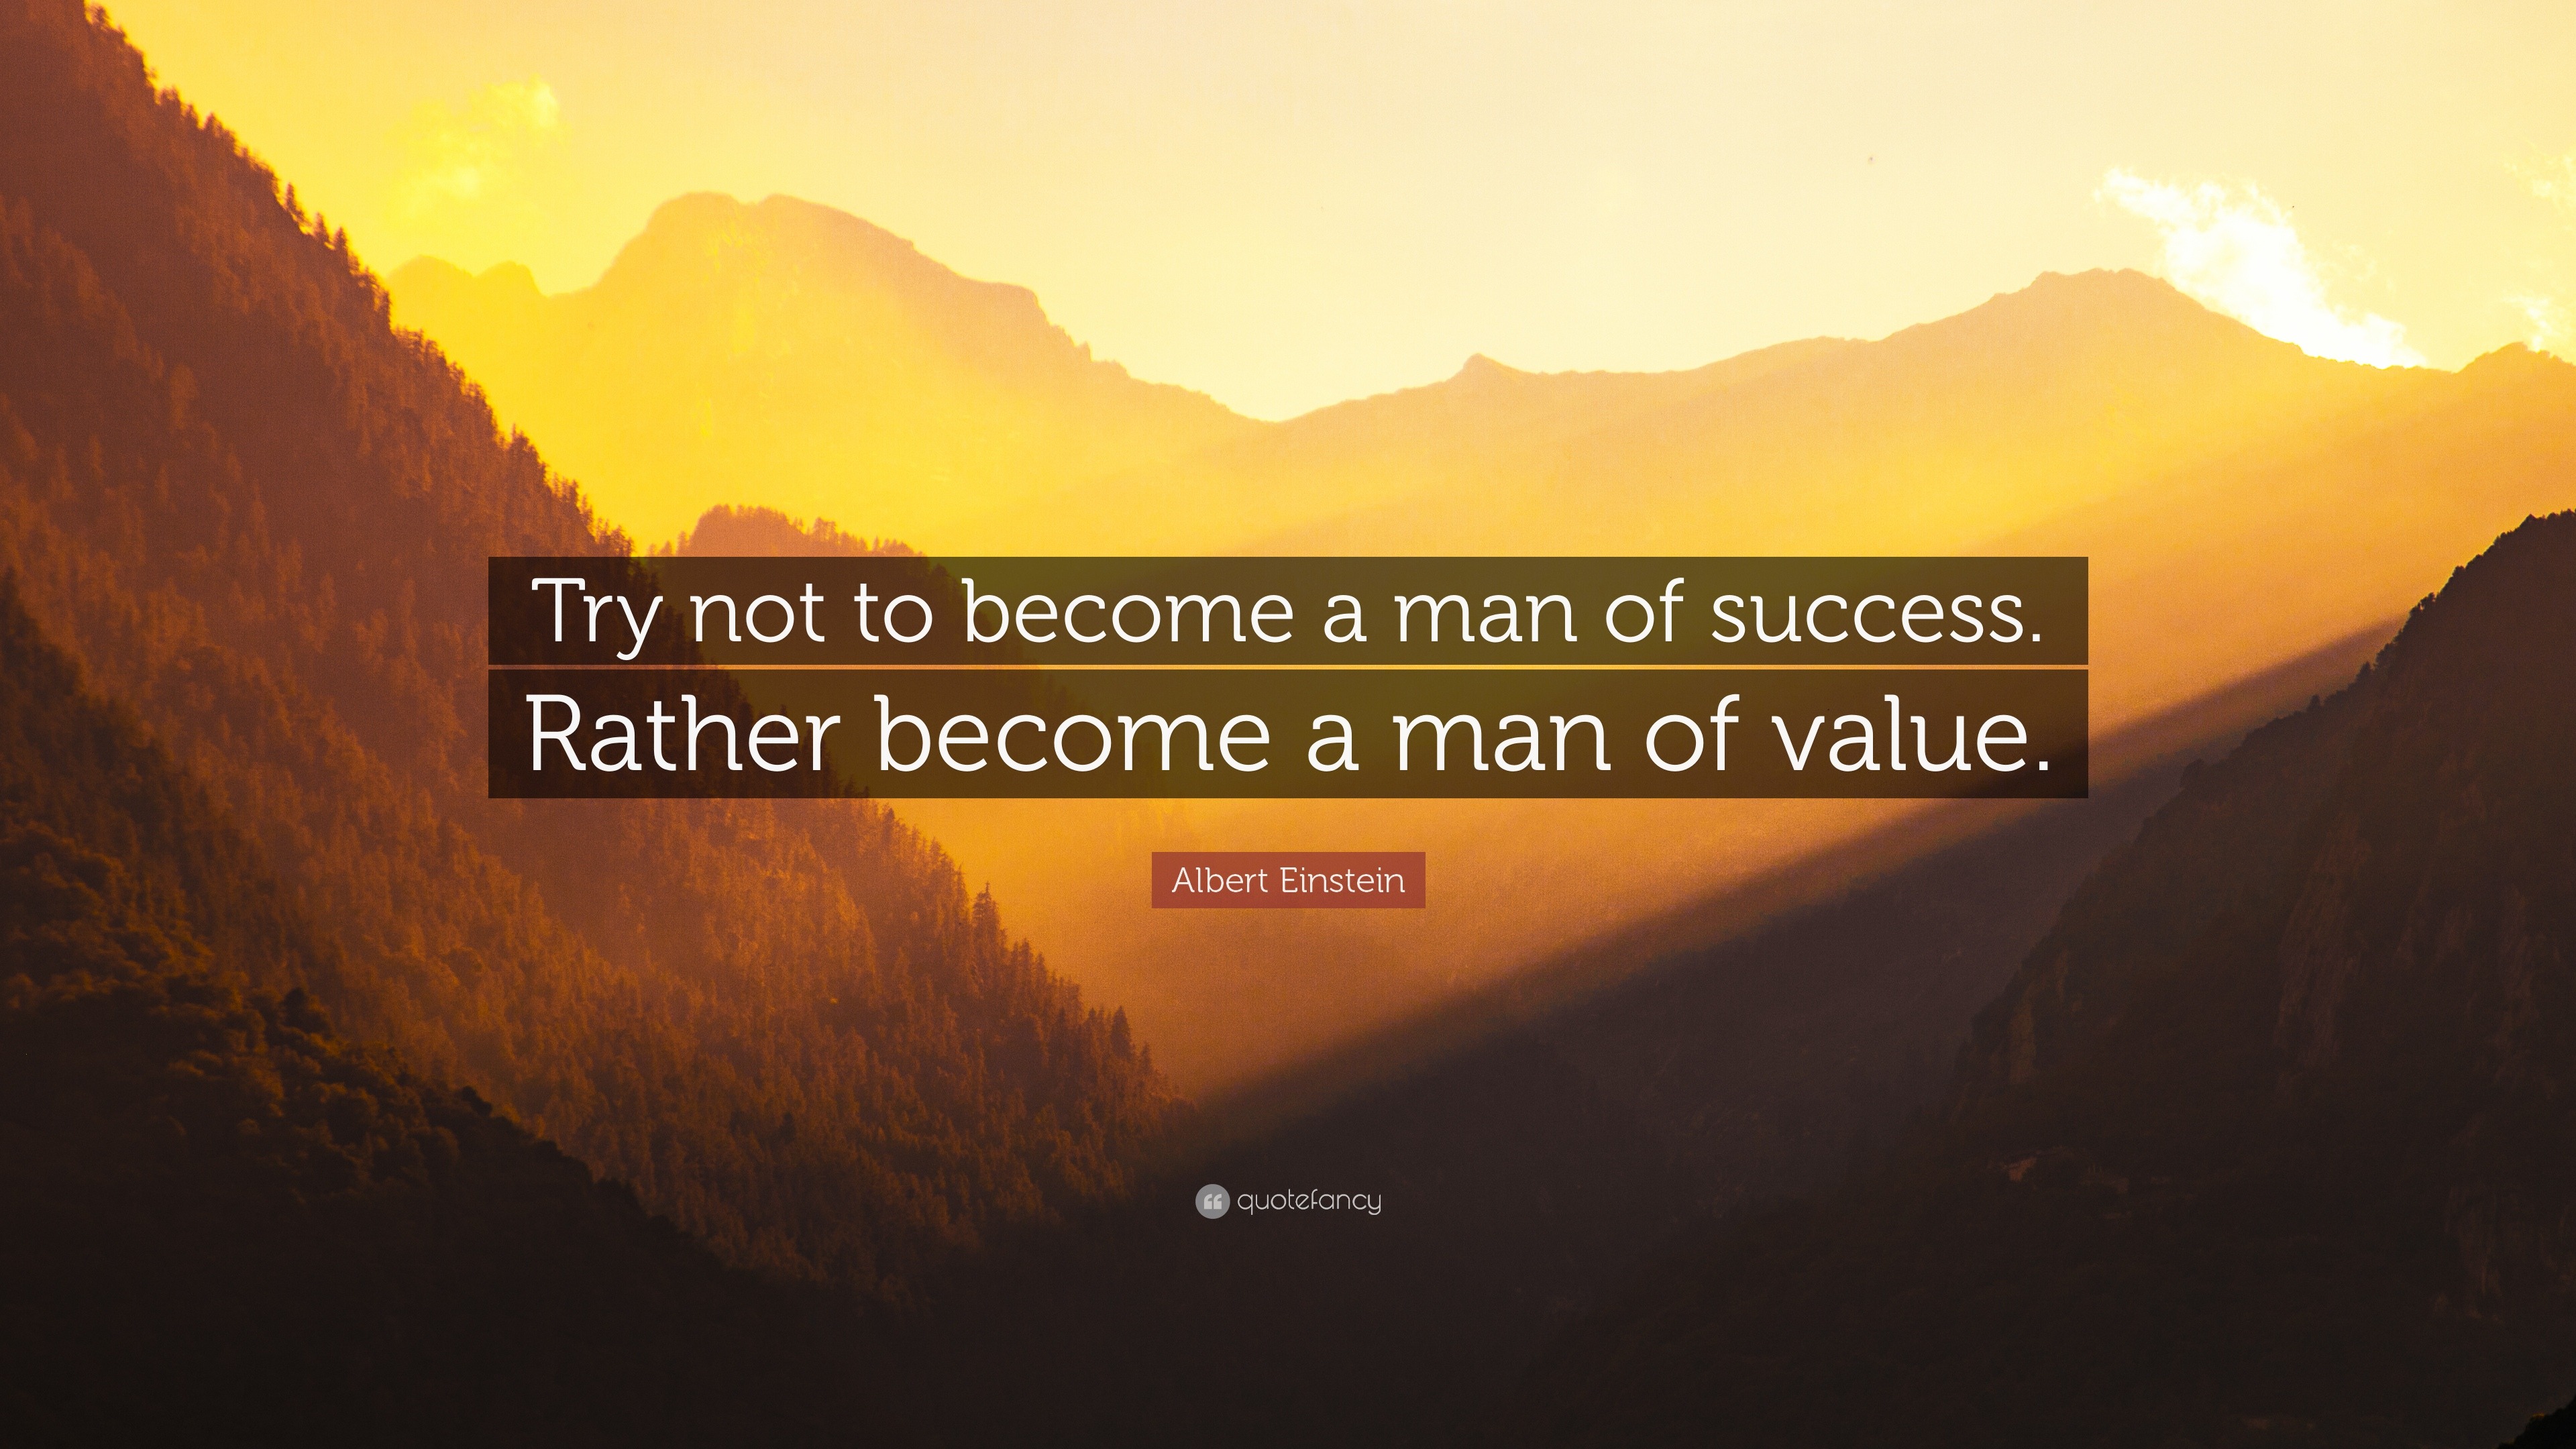 Albert Einstein Quote: “Try not to become a man of success. Rather ...